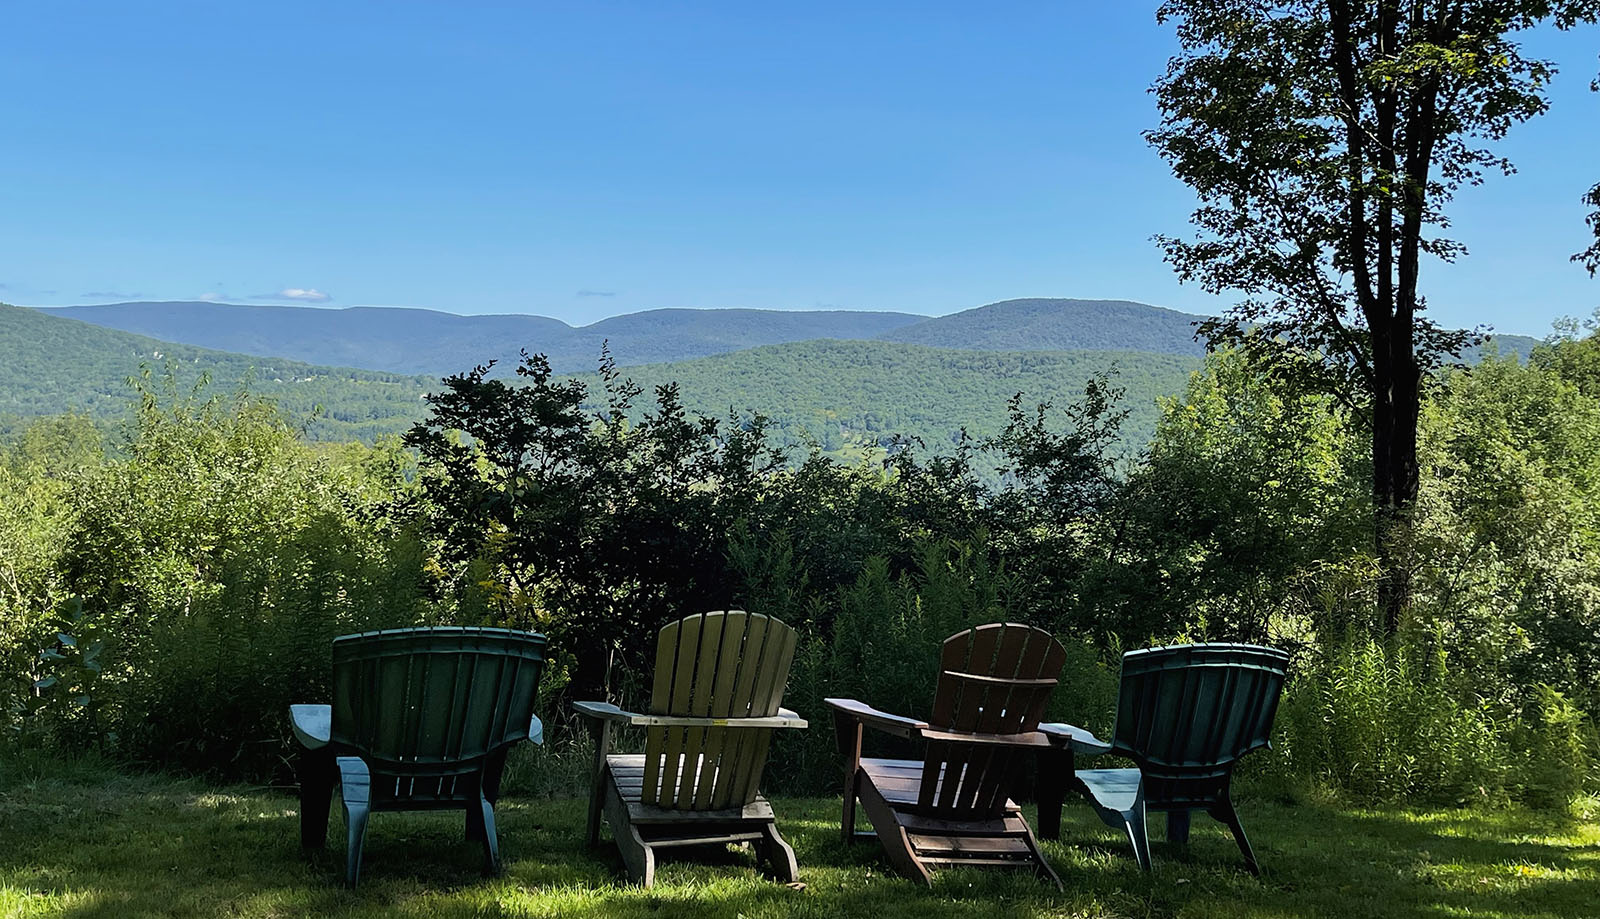 Adirondack Chairs in a great view spot!